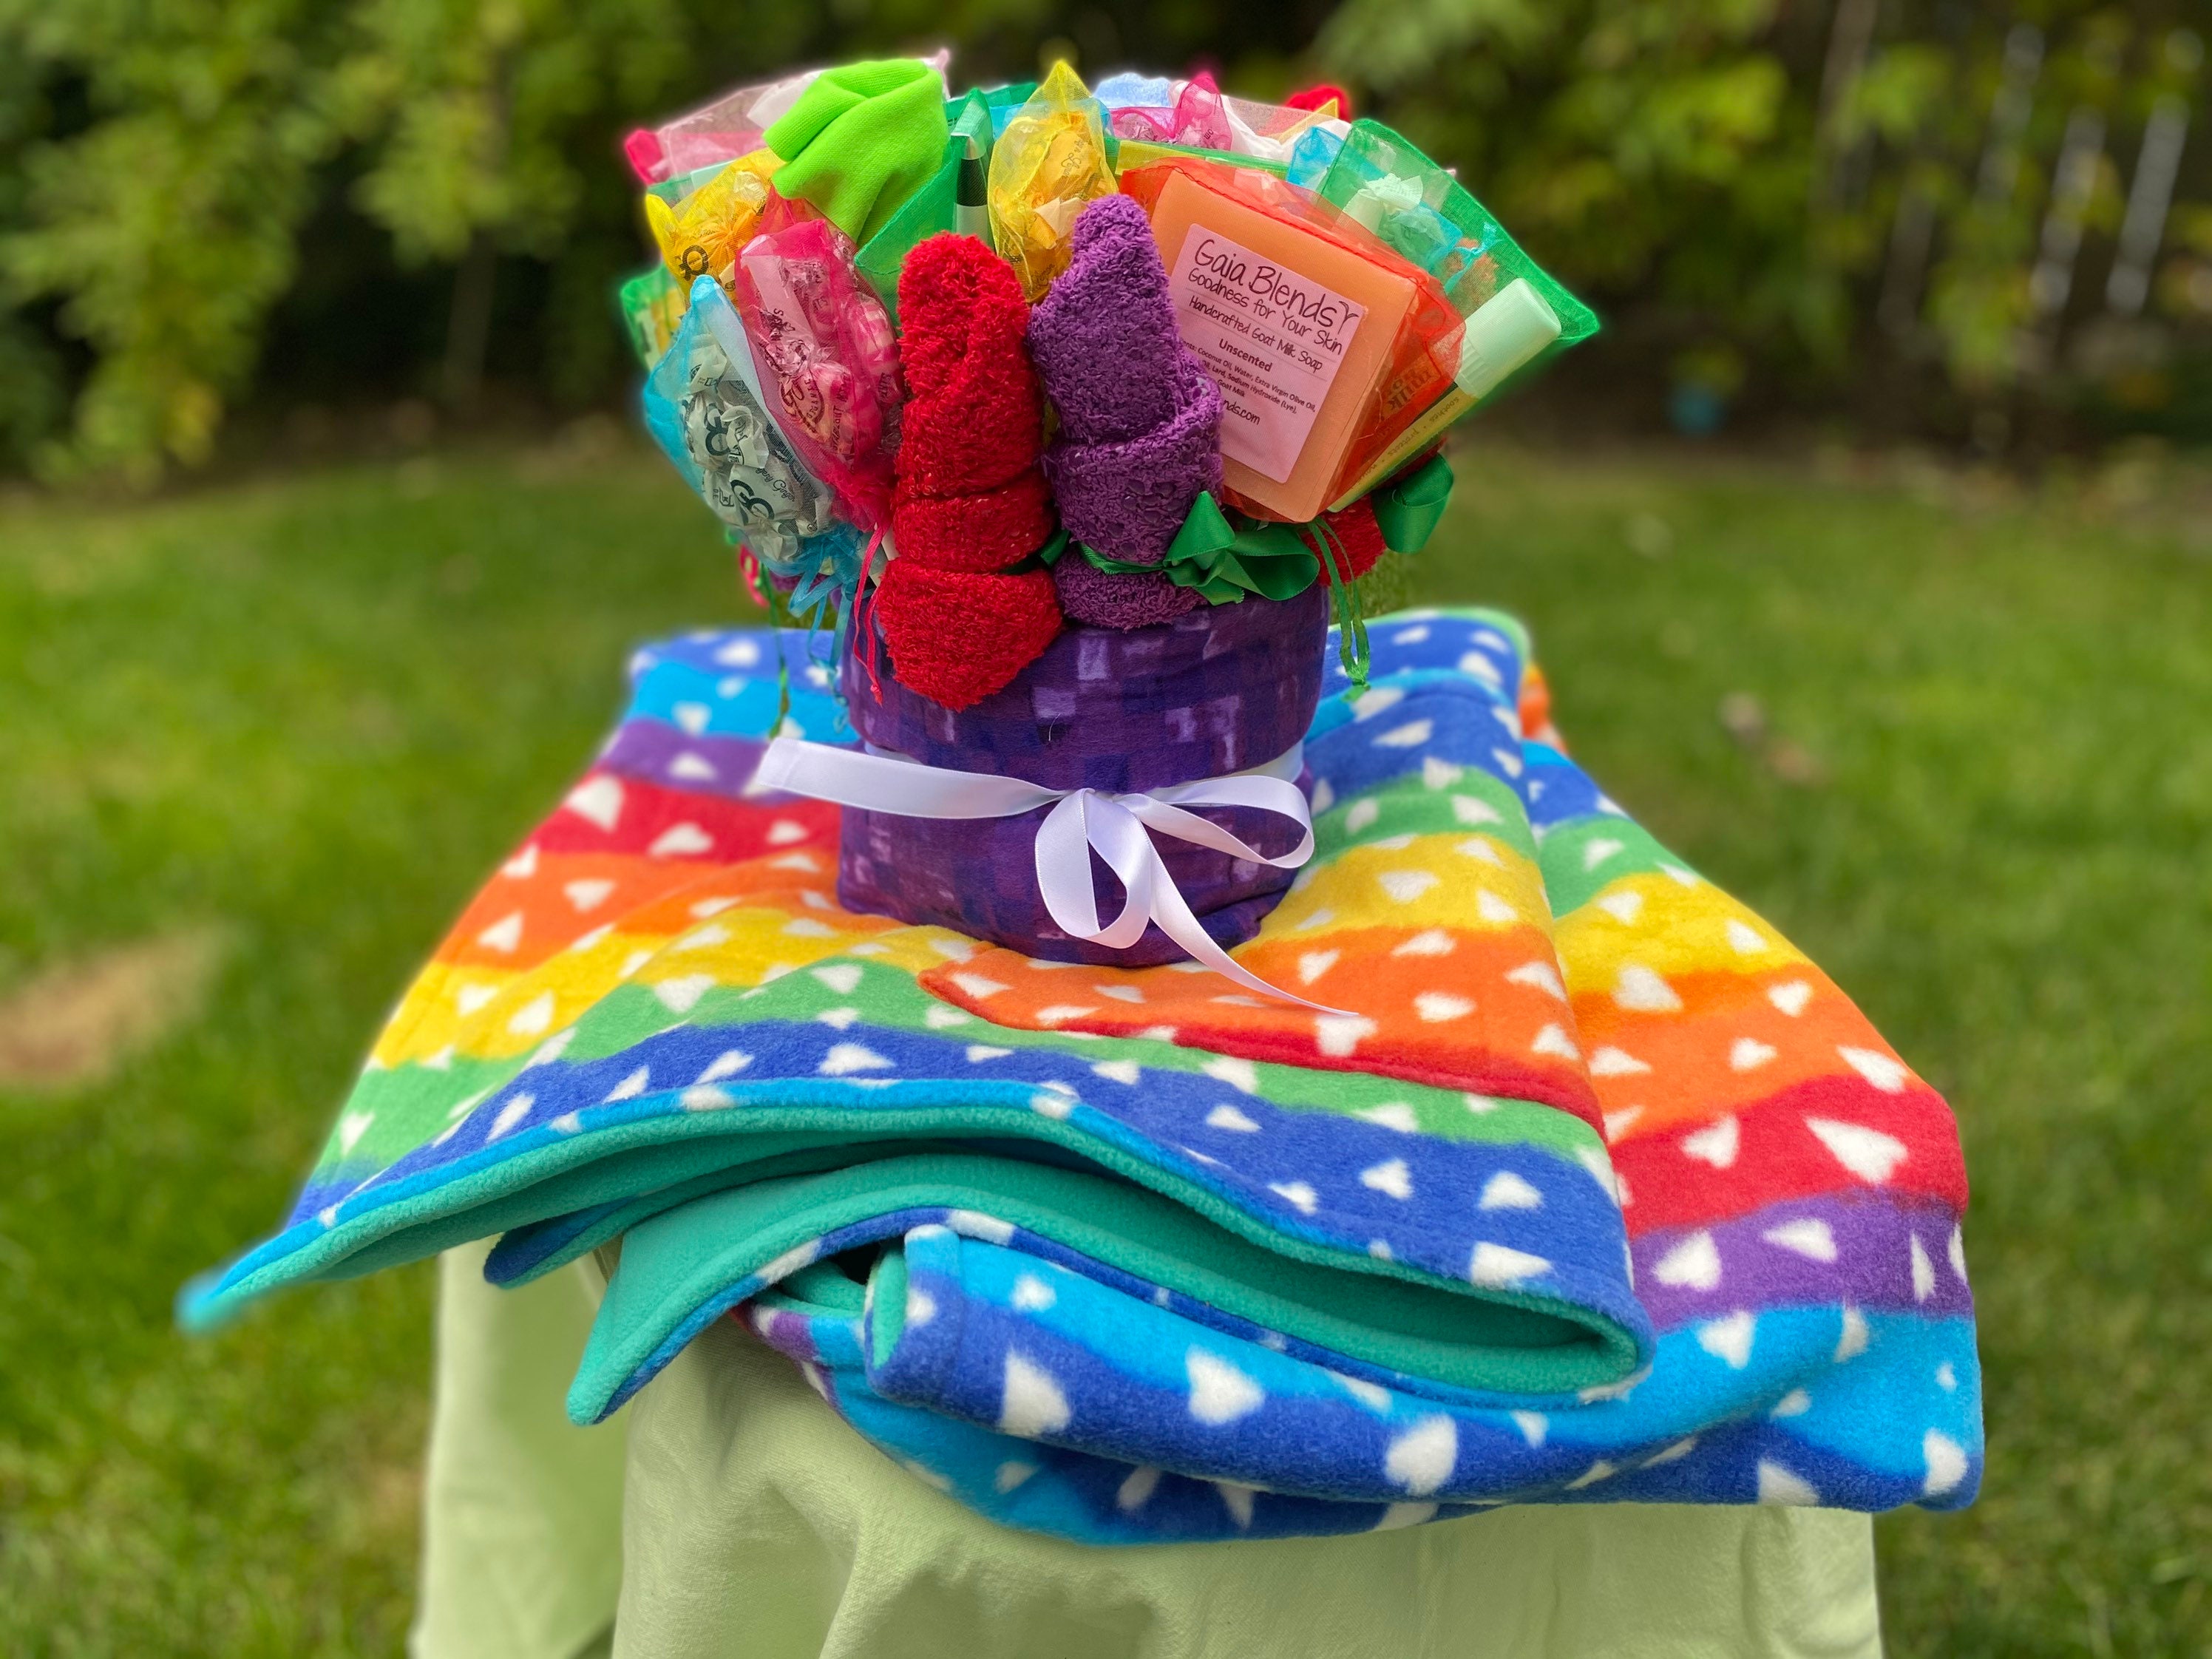 Rainbow Hearts Cancer Care Package - A Bouquet Of Love Cancer Care Package, Get Well Soon Gift, Chemo Gift